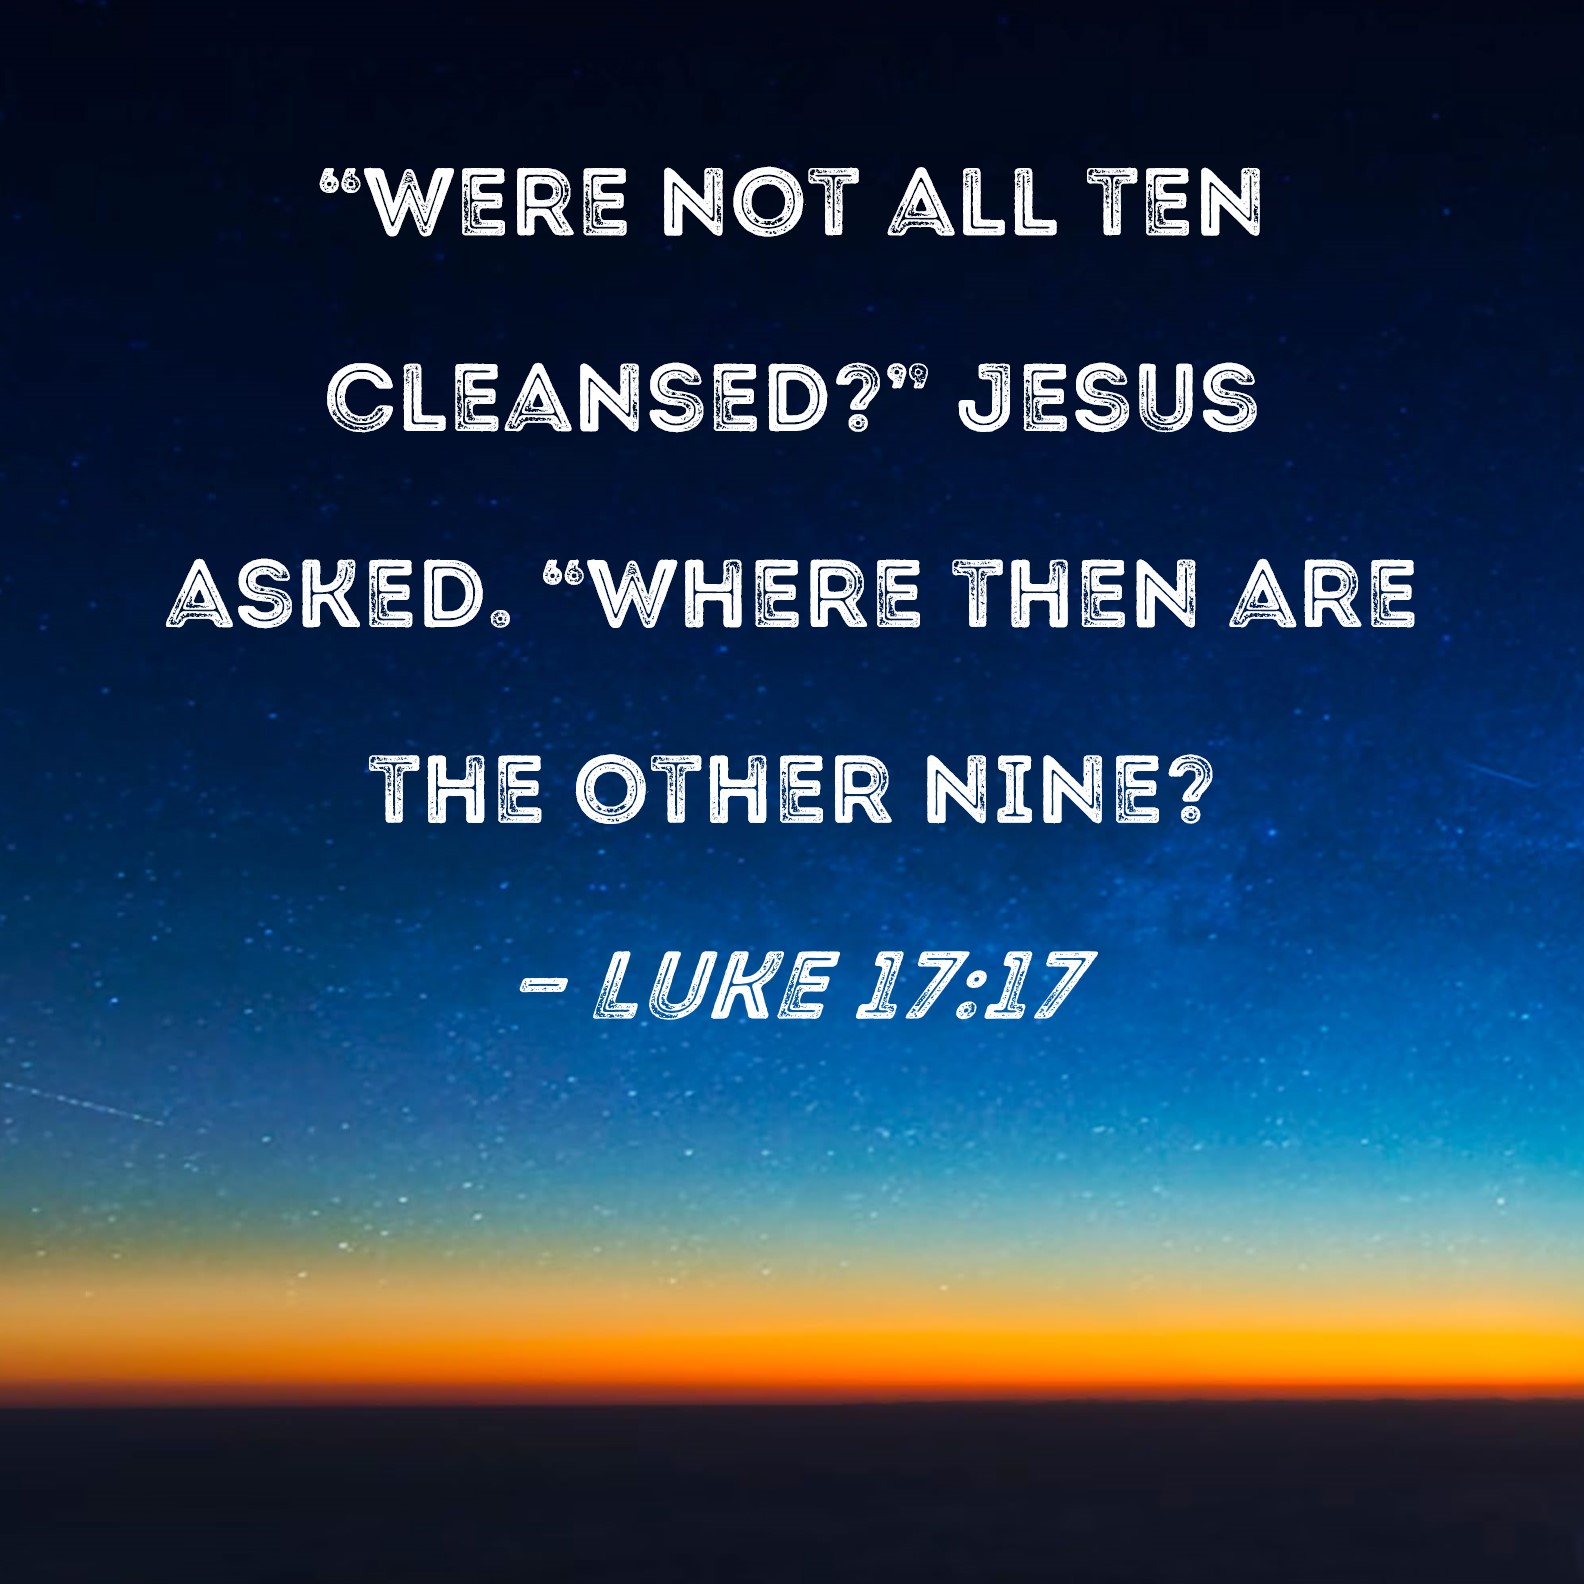 luke-17-17-were-not-all-ten-cleansed-jesus-asked-where-then-are